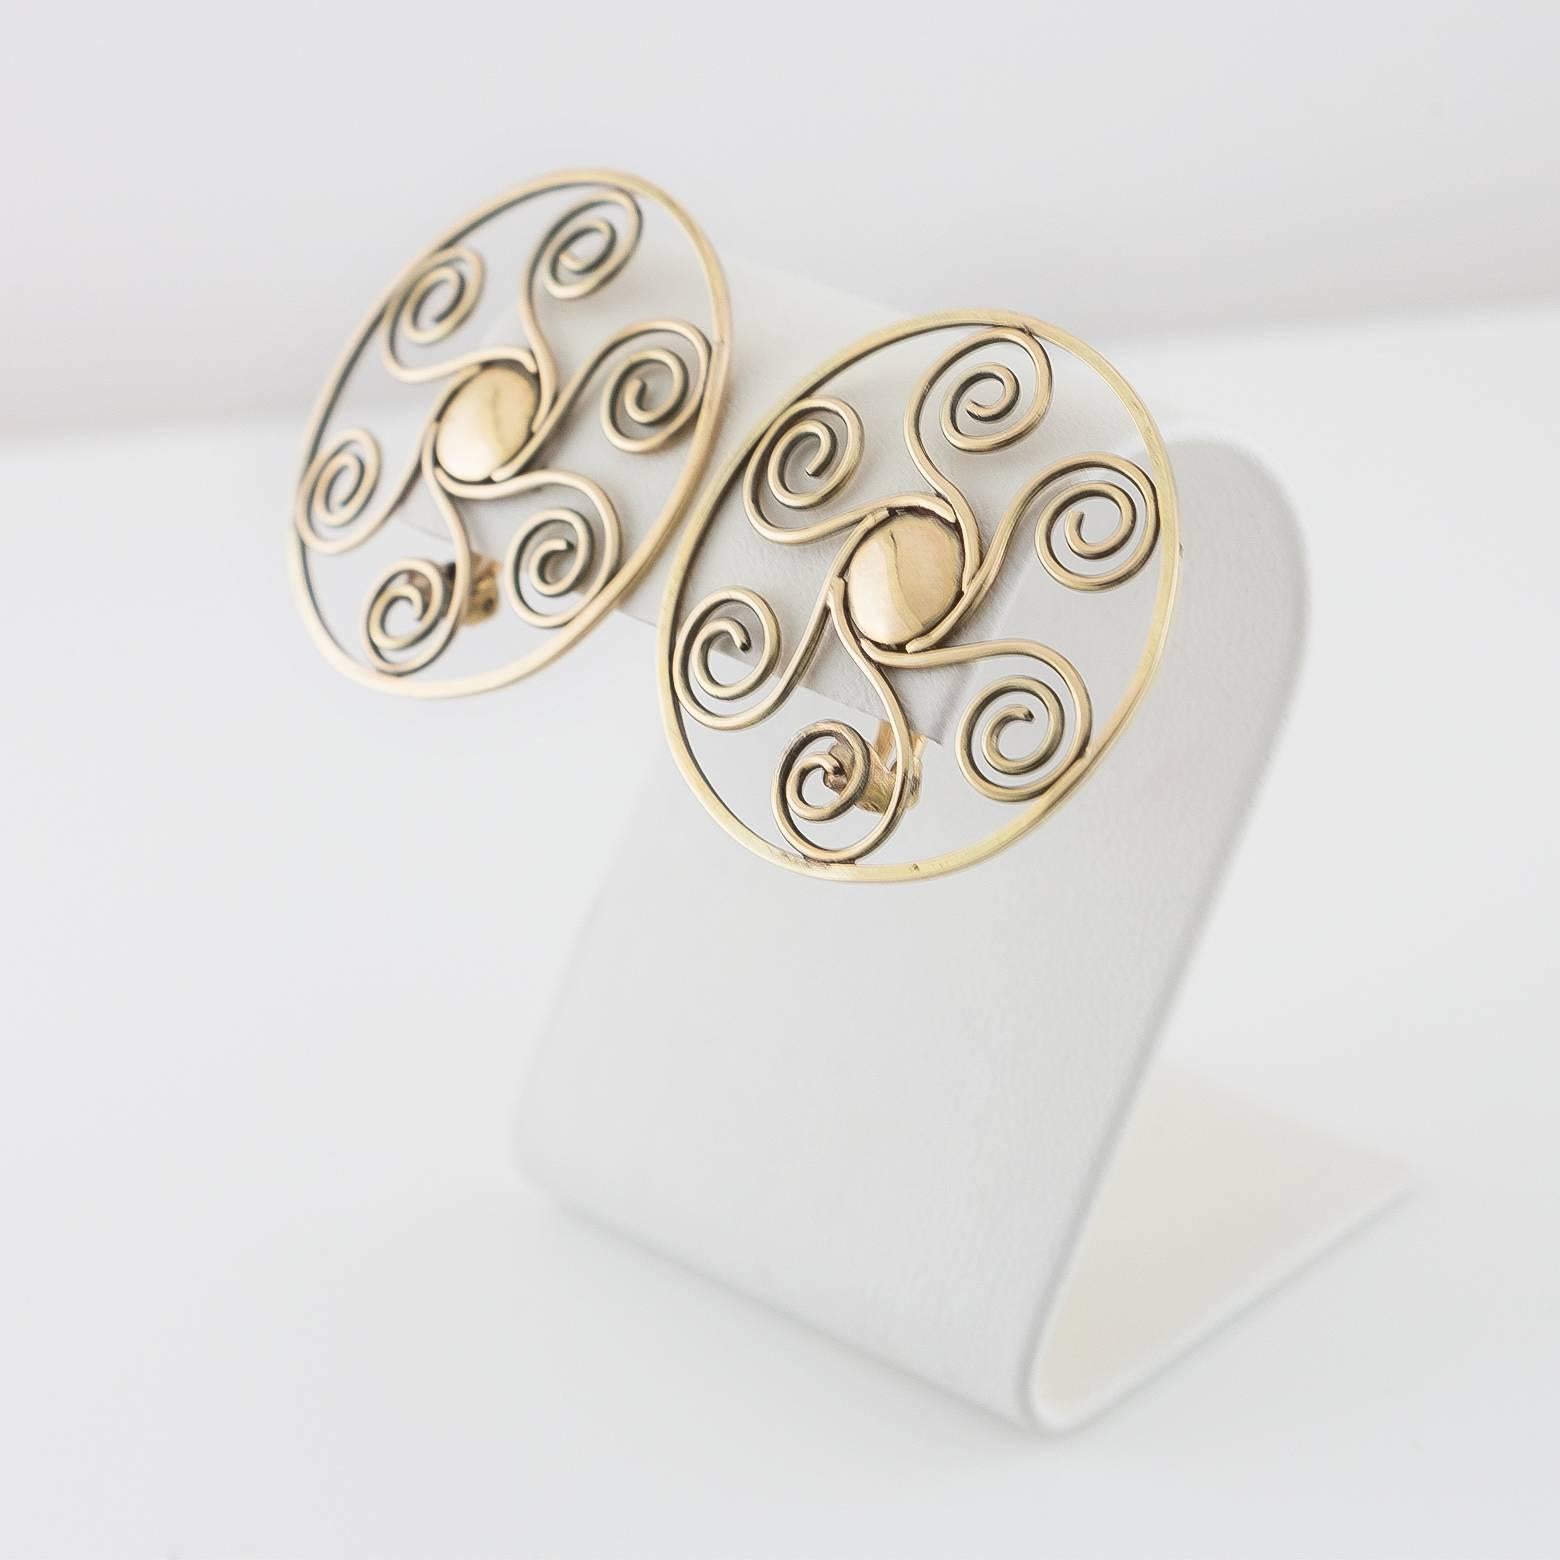 These lightweight, fun and artsy clip-on 14k earrings are elegant and regal. Easily worn casually or dressed up for added class, they are comfortable and add flare to any outfit.  Spirals, intricate and detailed with a little style and fun- these